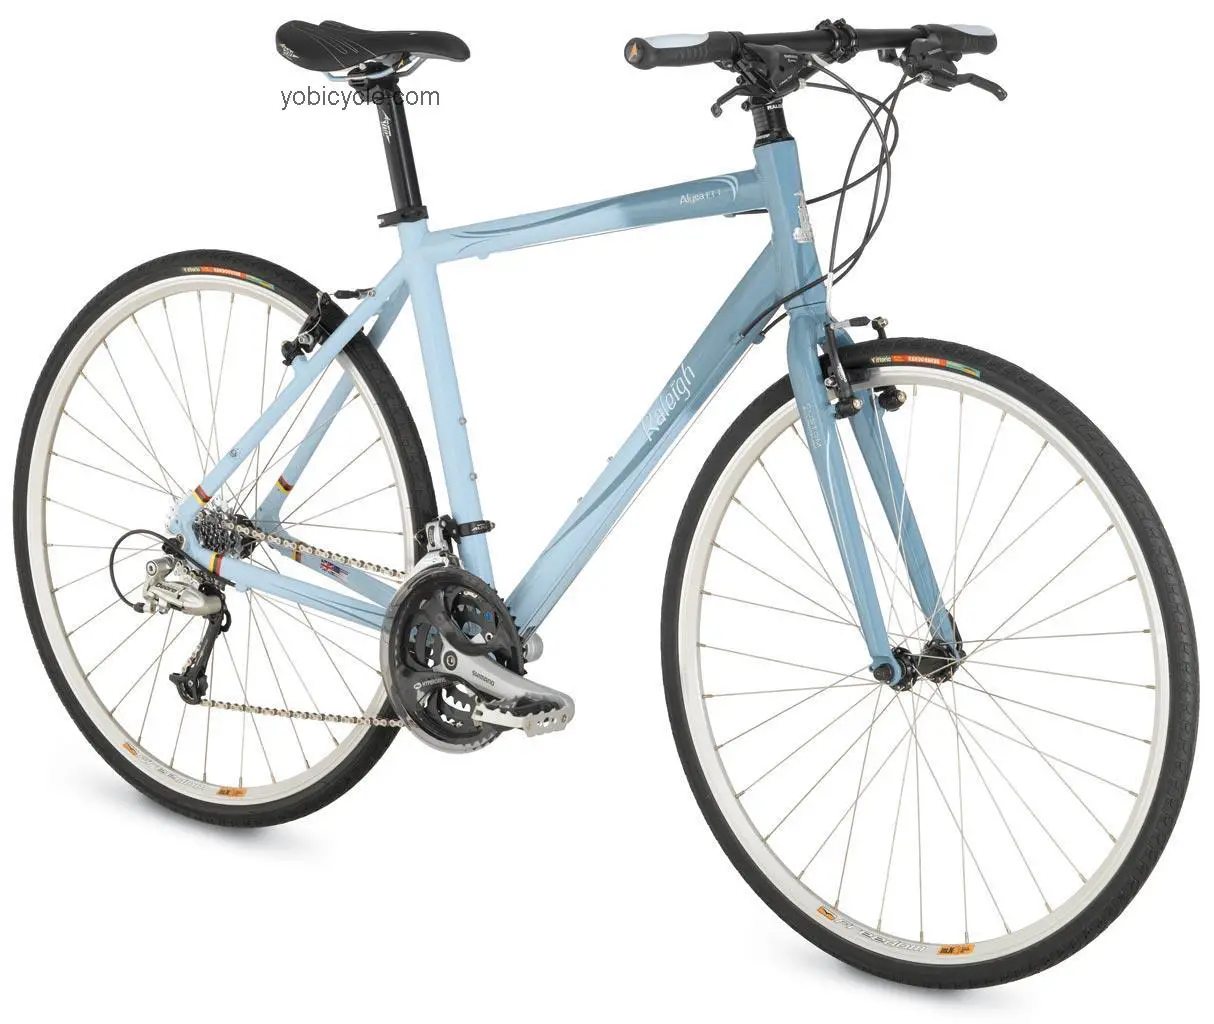 Raleigh Alysa FT1 2009 comparison online with competitors